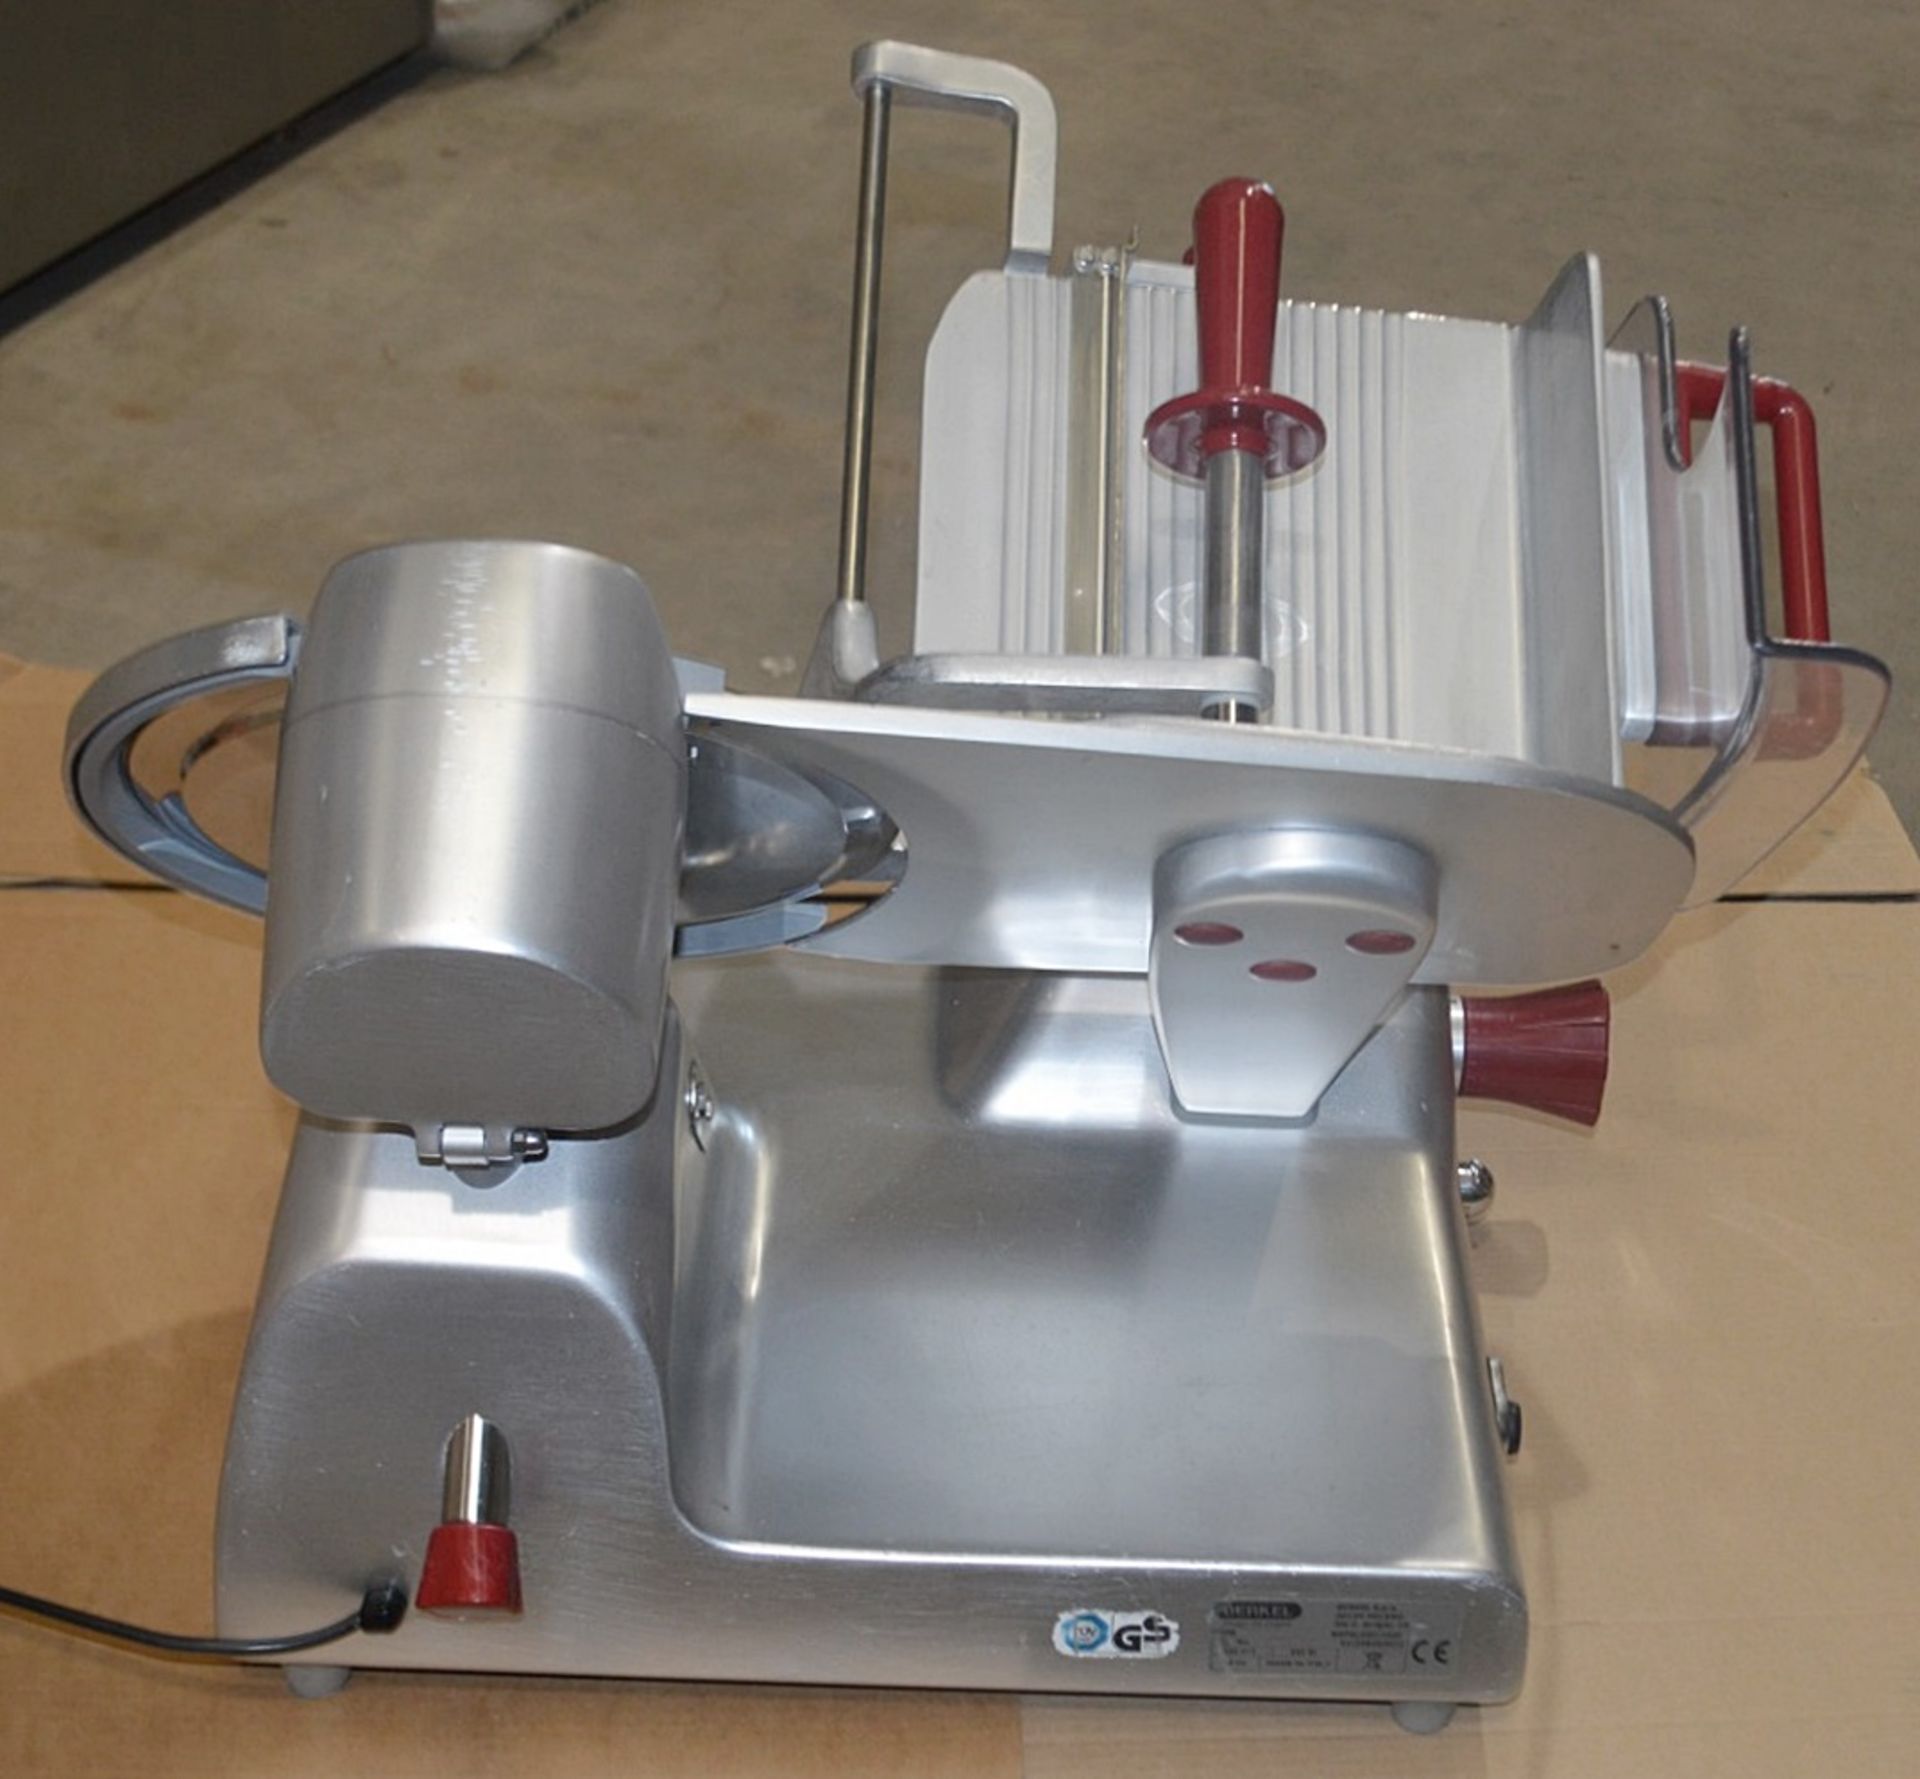 1 x AVERY BERKEL Commercial Meat Slicer In Stainless Steel - Dimensions: H54 x W52 x D42cm - Very - Image 5 of 10